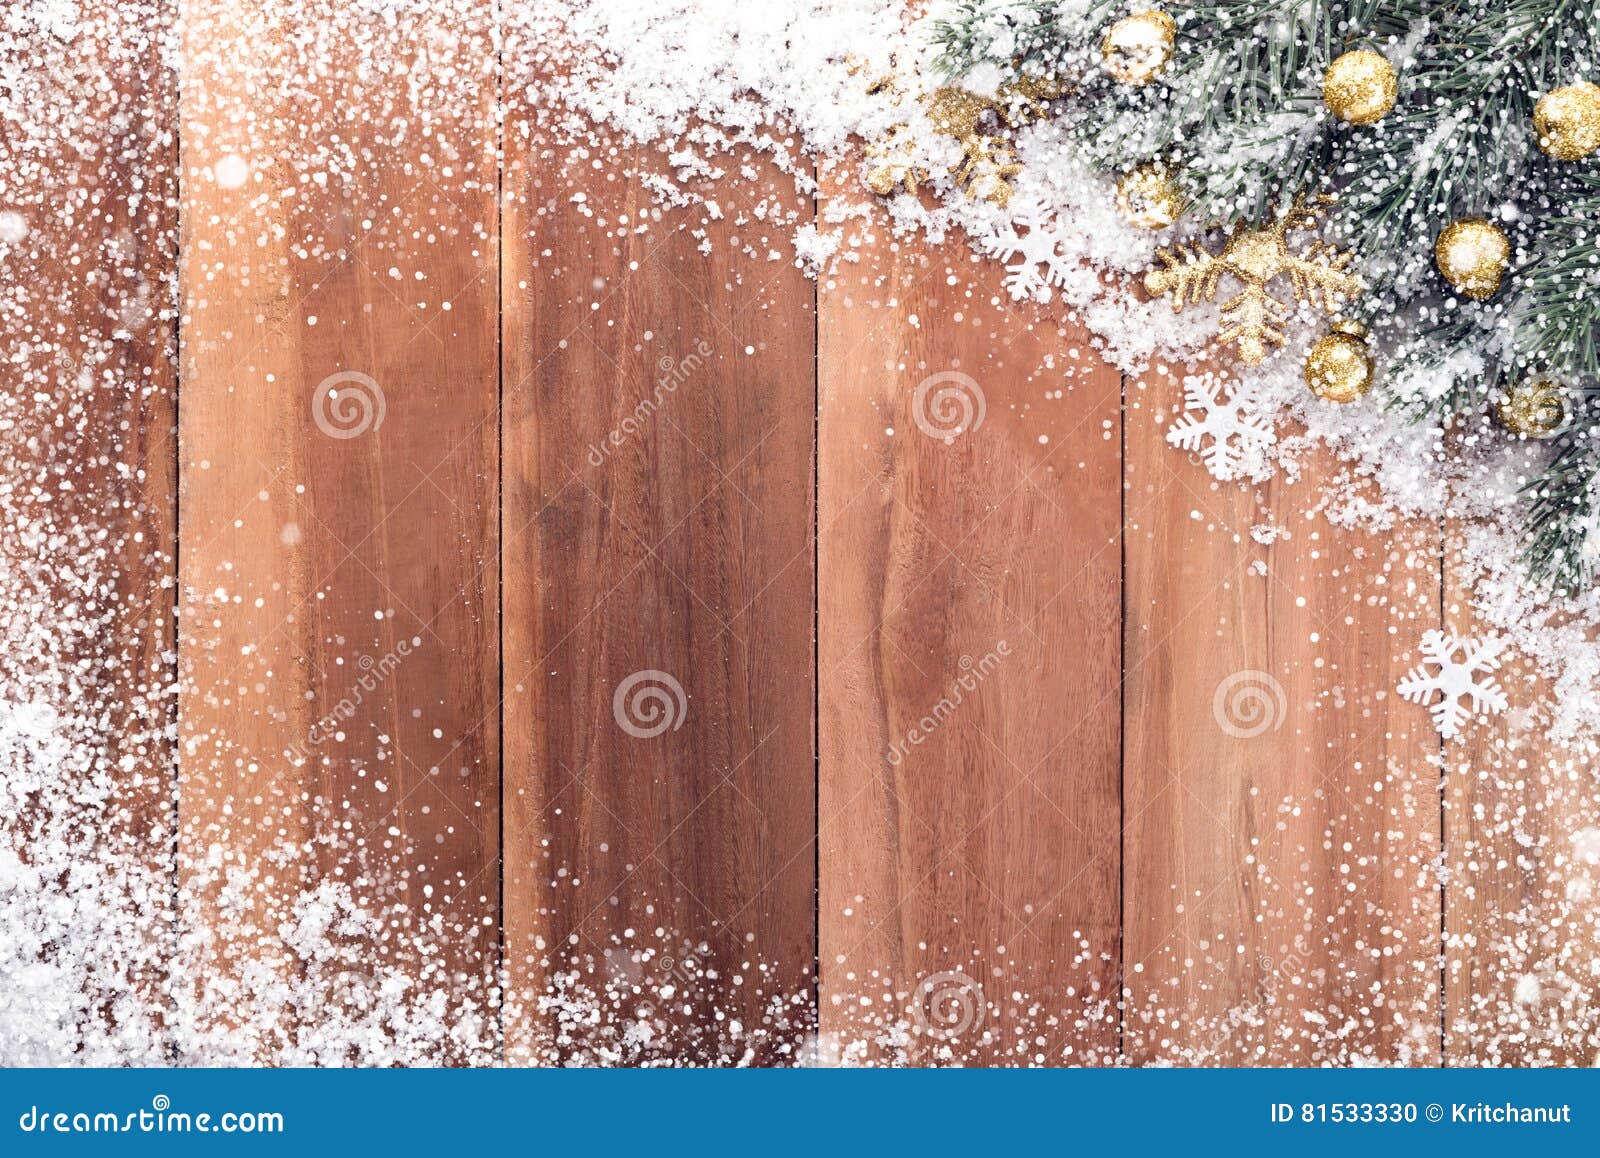 Christmas Ornaments with Snow on Wood Background Stock Photo - Image of ...